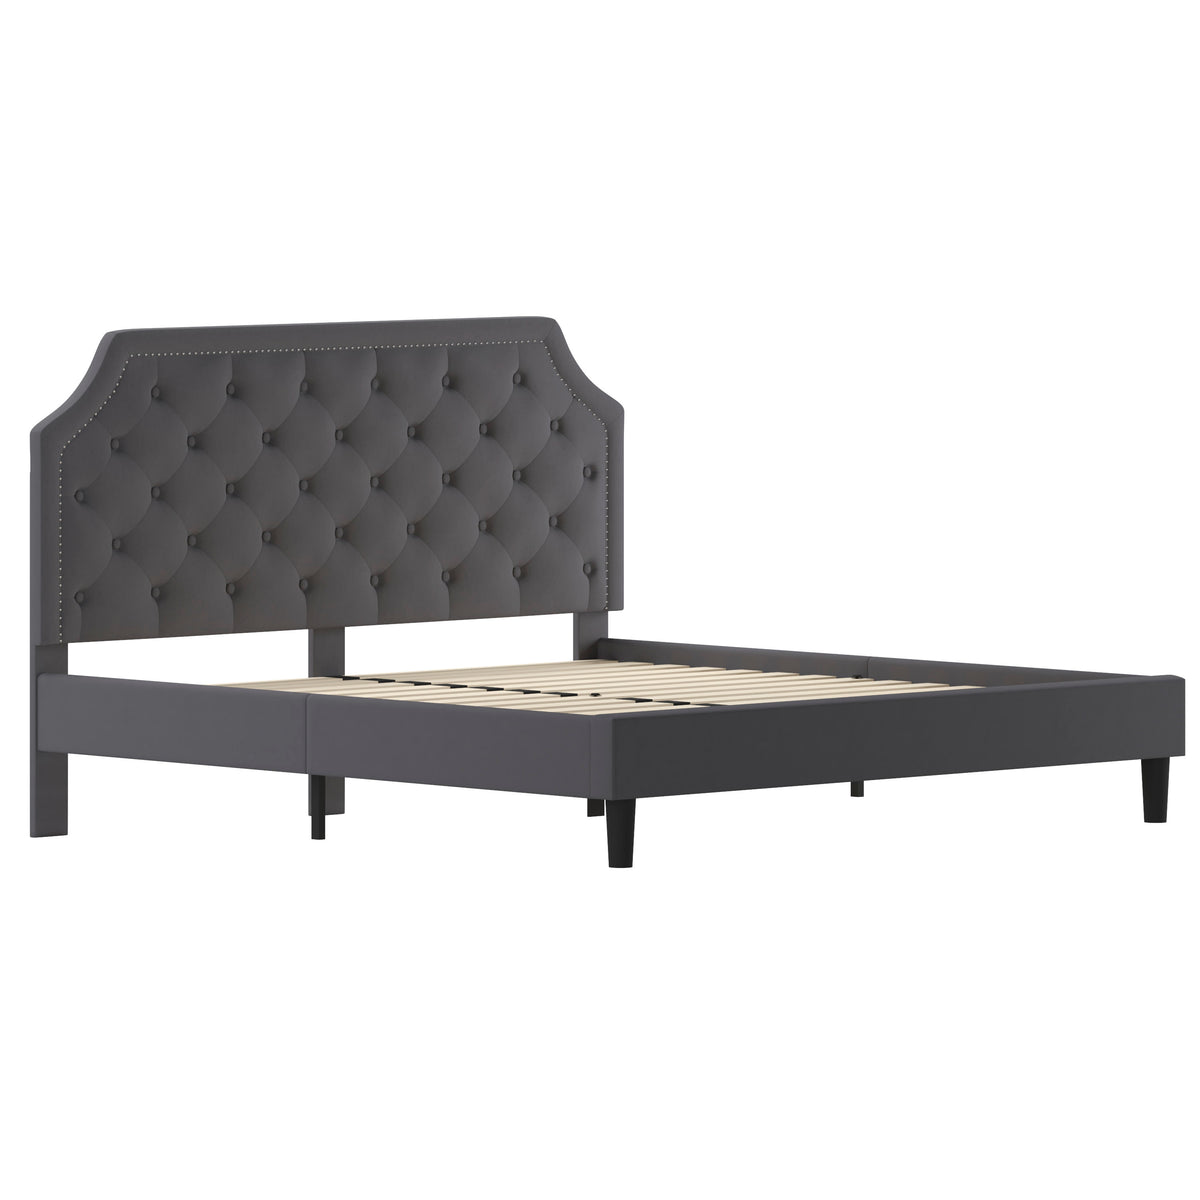 Dark Gray,King |#| King Size Arched Tufted Upholstered Platform Bed in Dark Gray Fabric